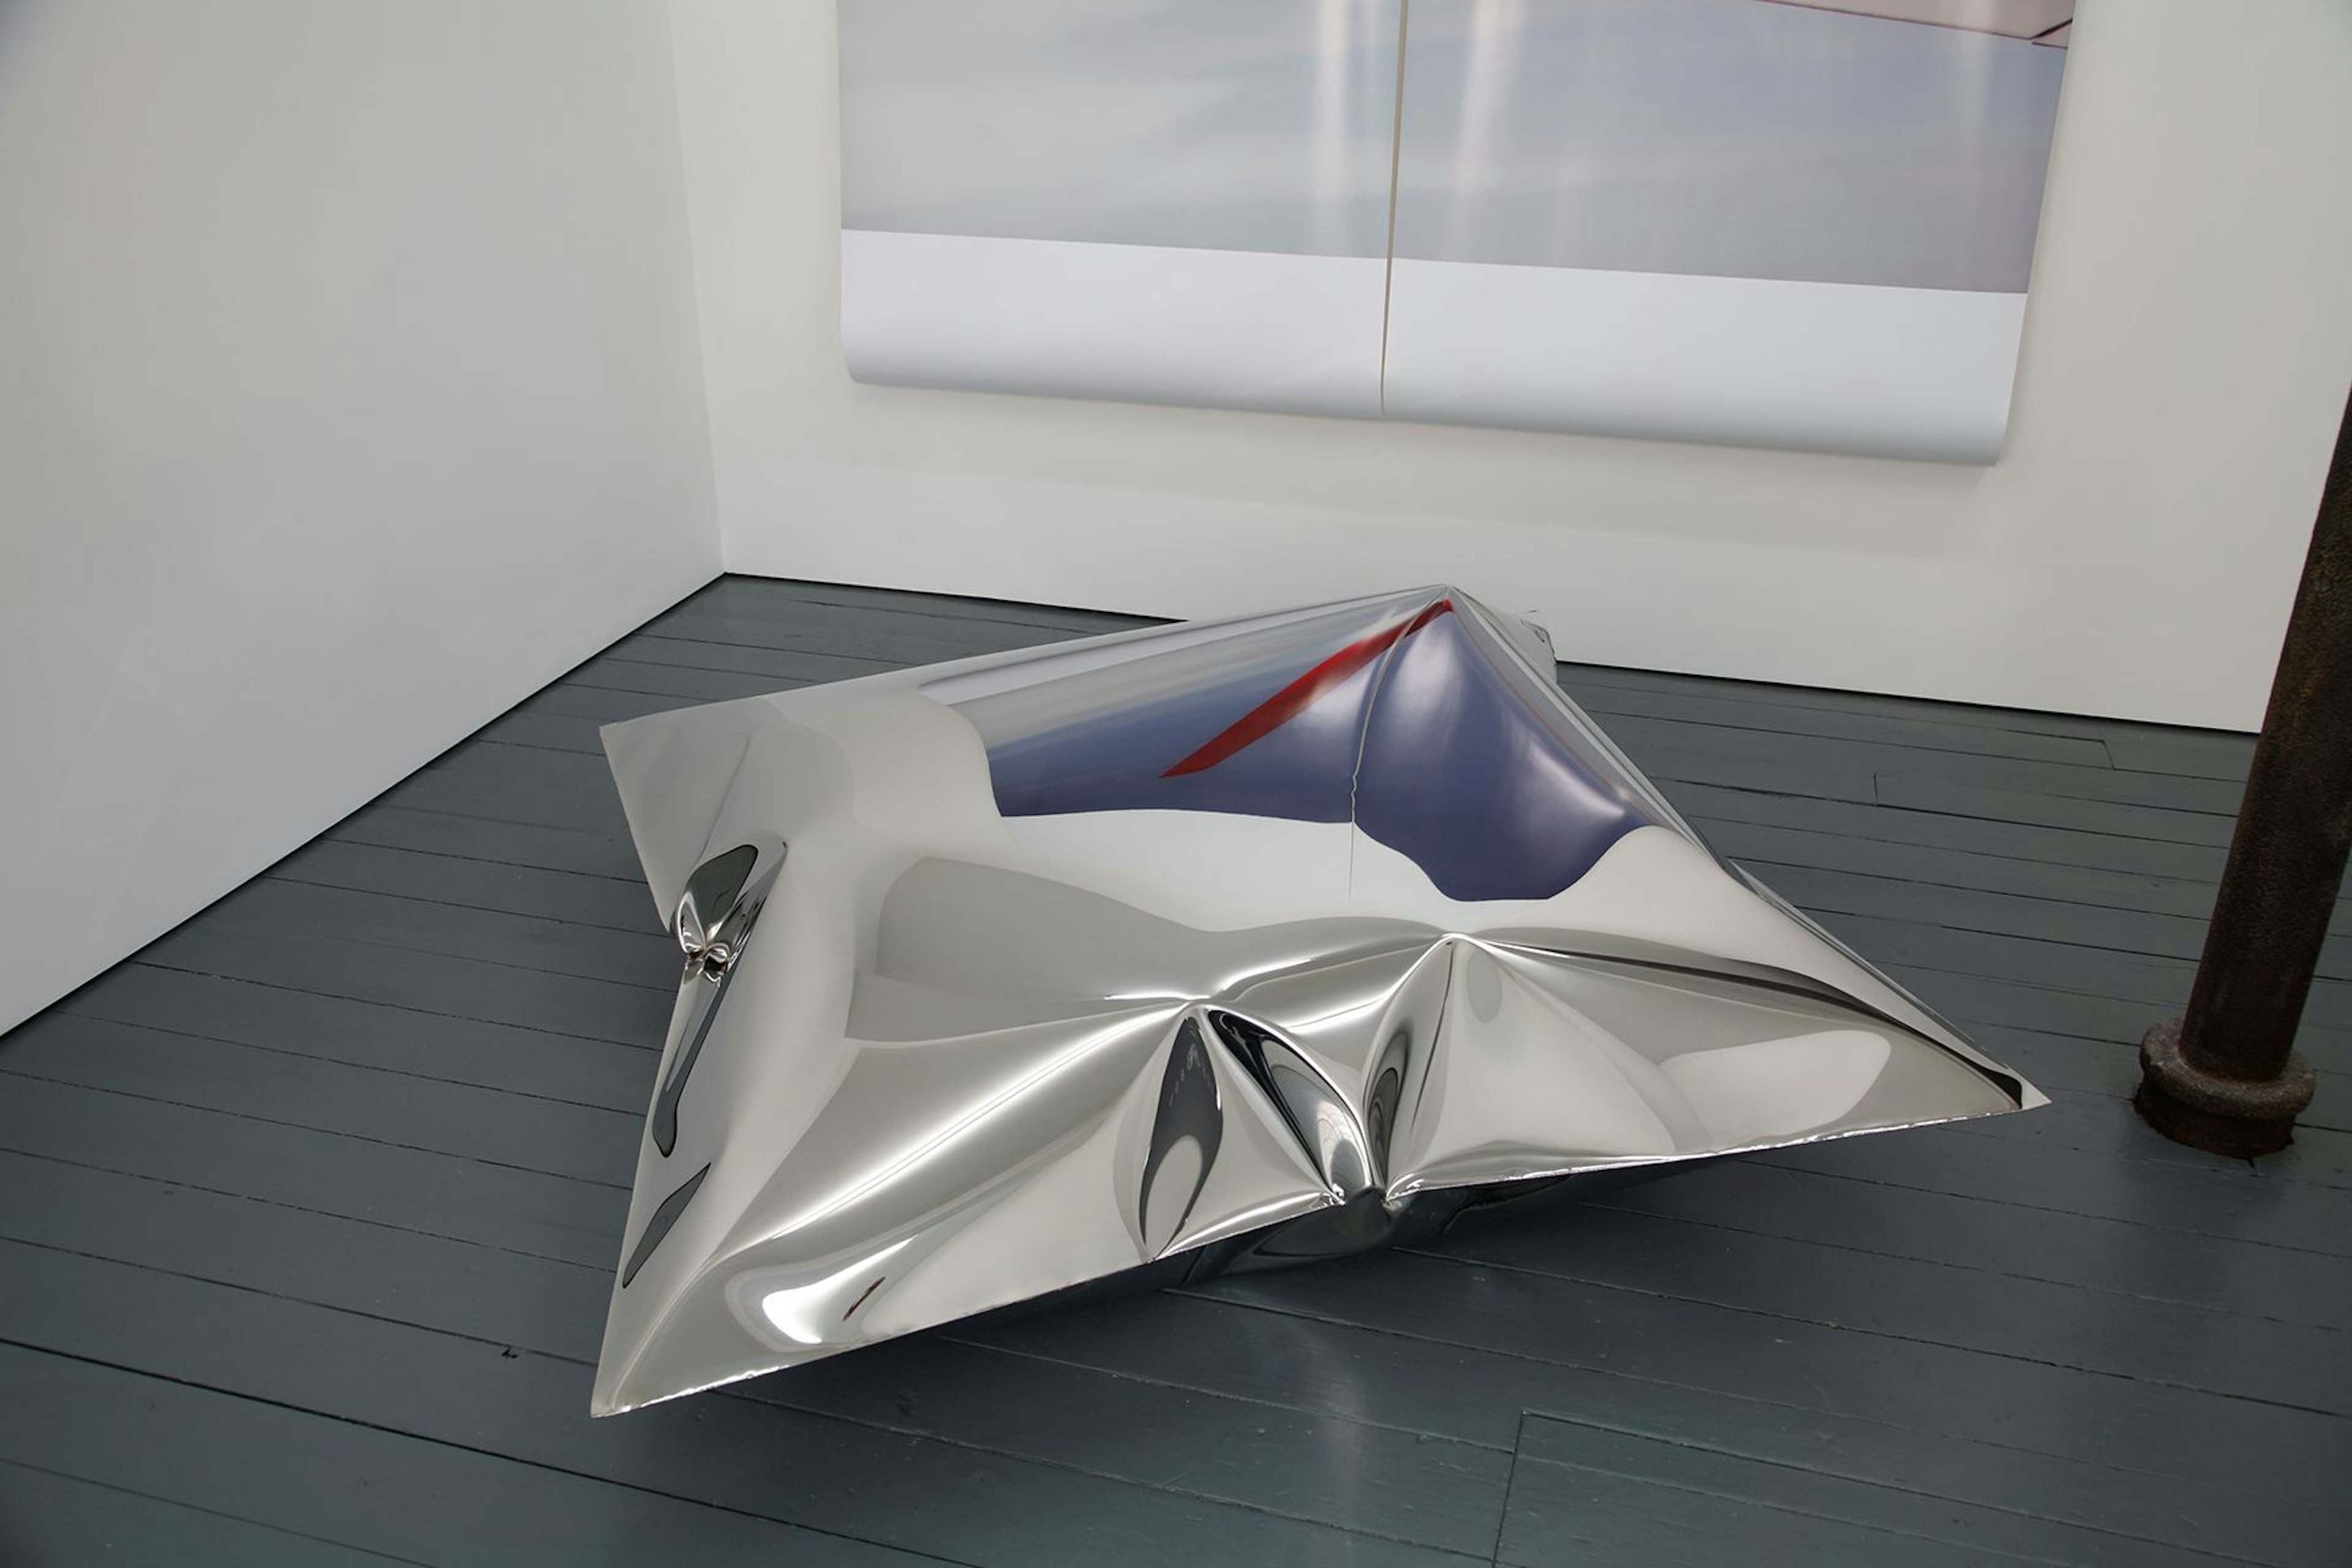 Installation view of inflated steel form, 2012